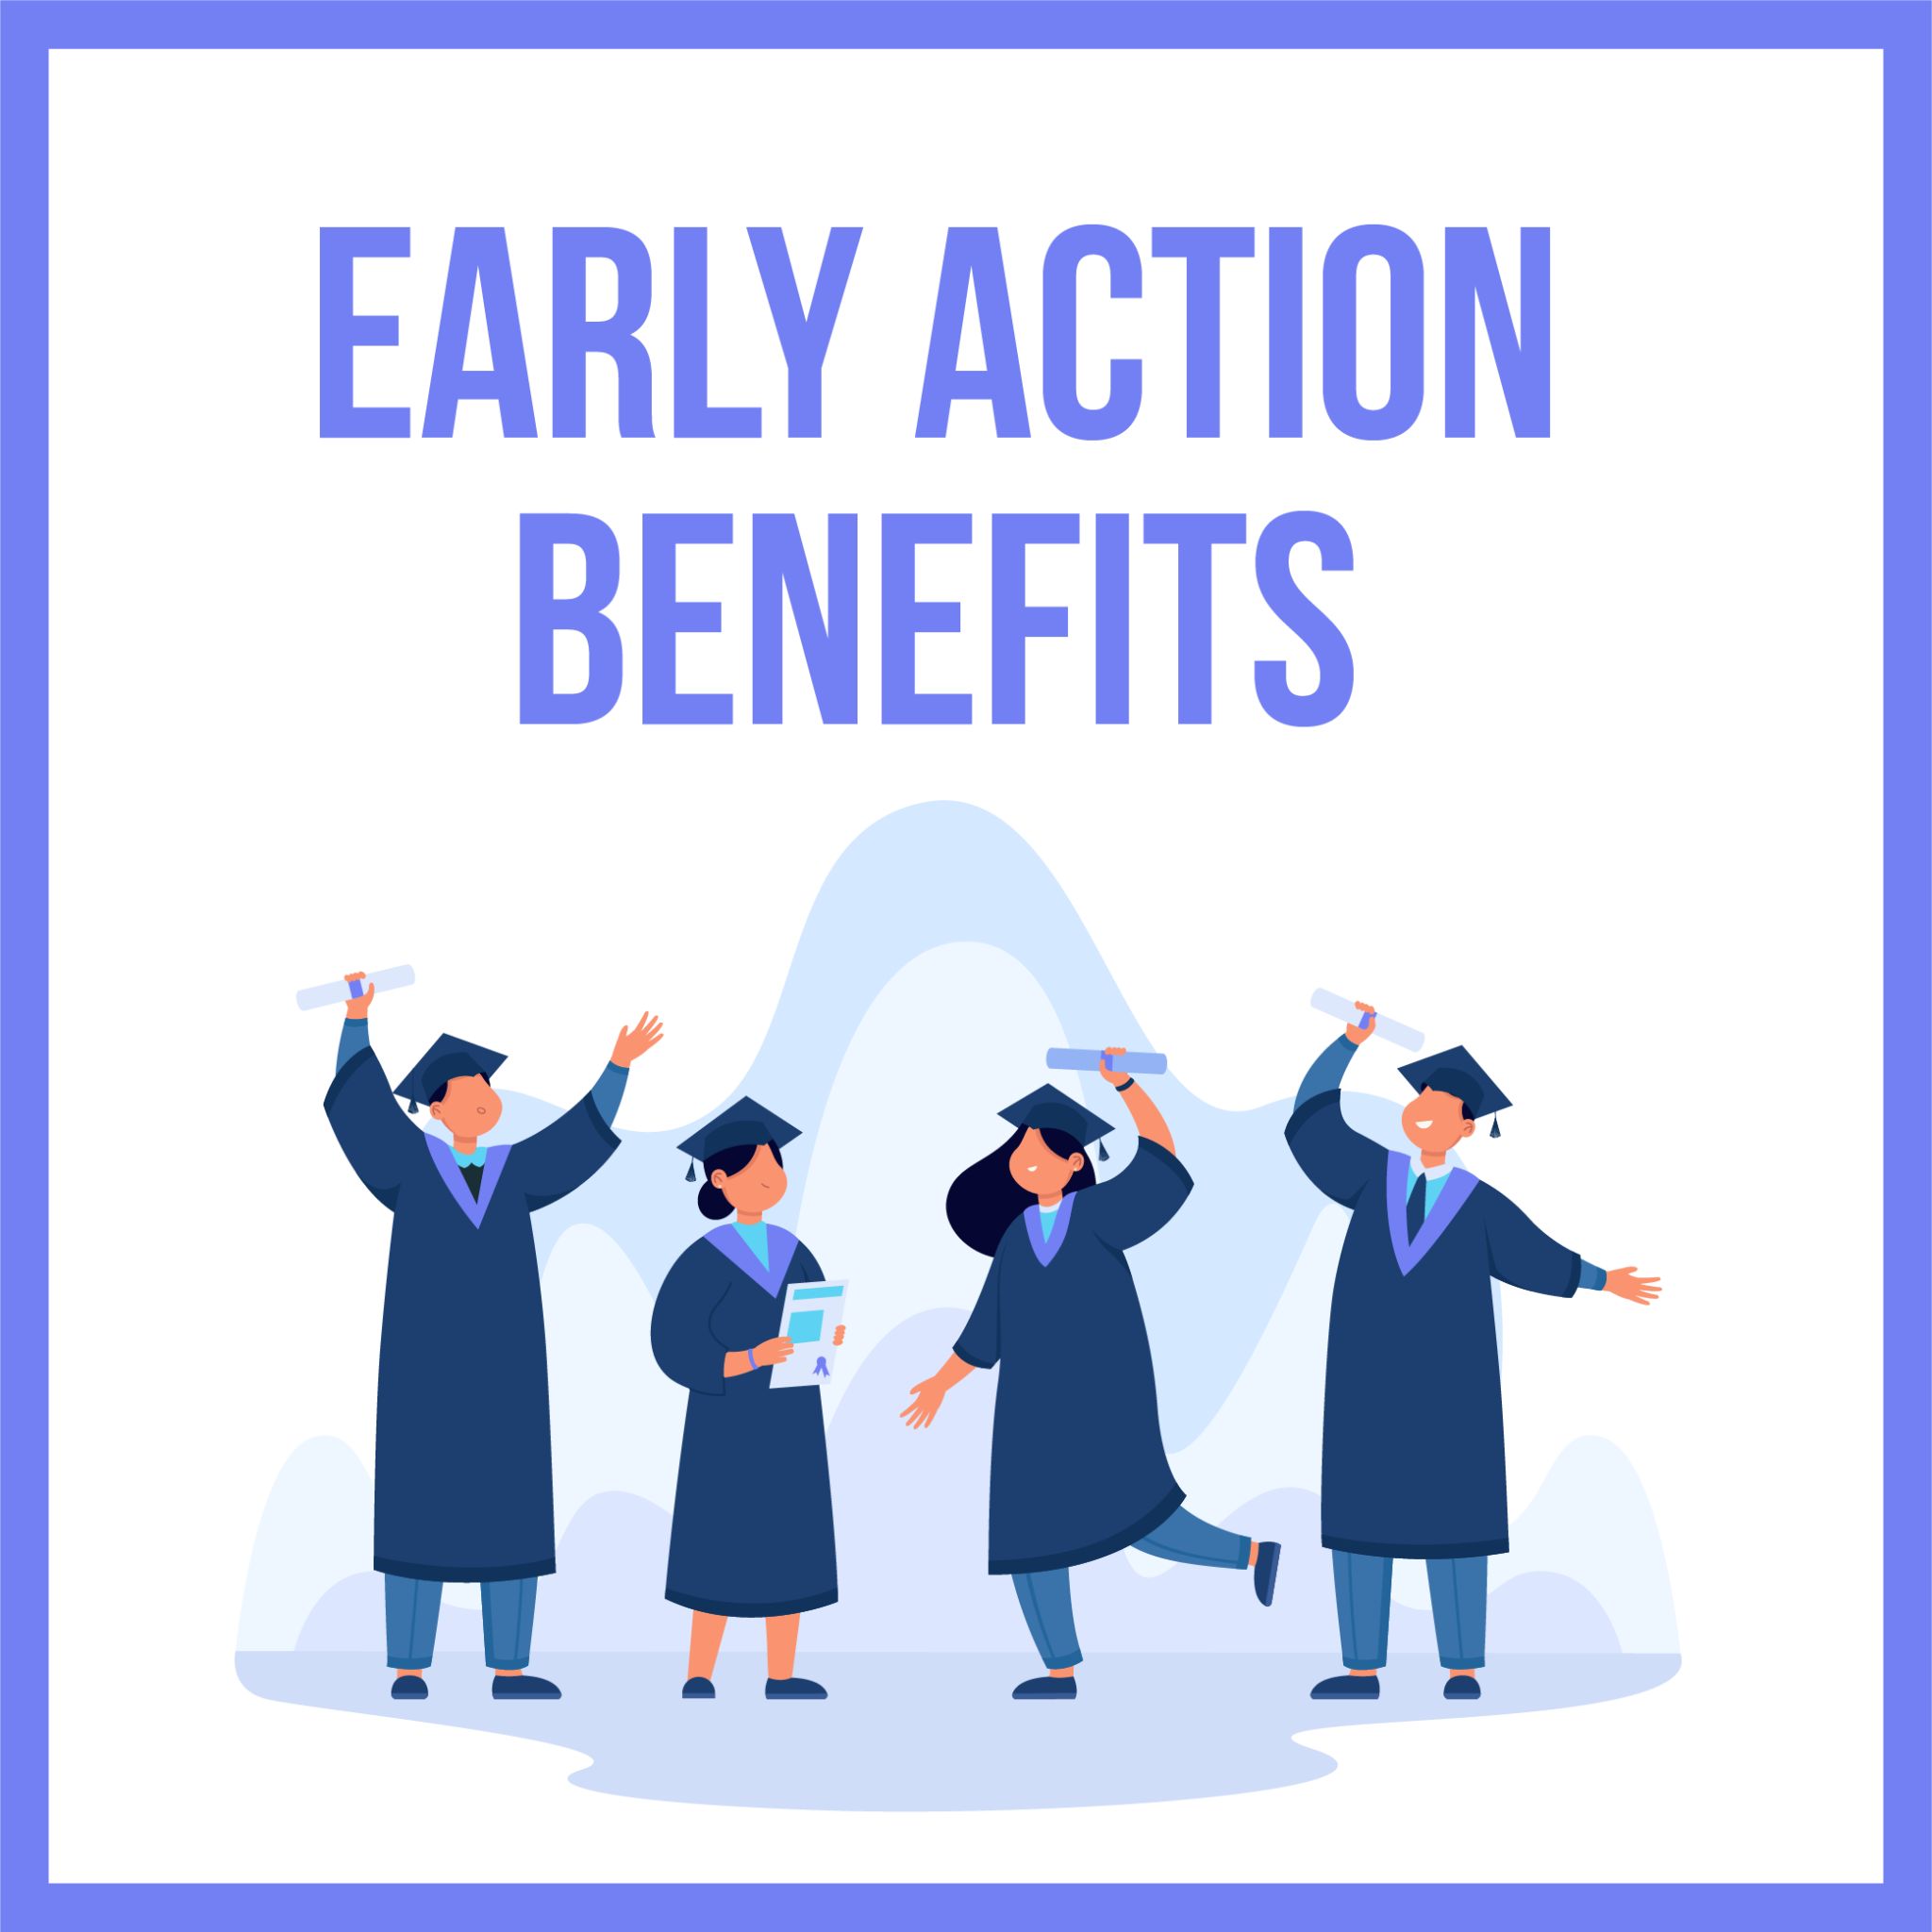 Early Action Benefits Why Apply Early Action for College?